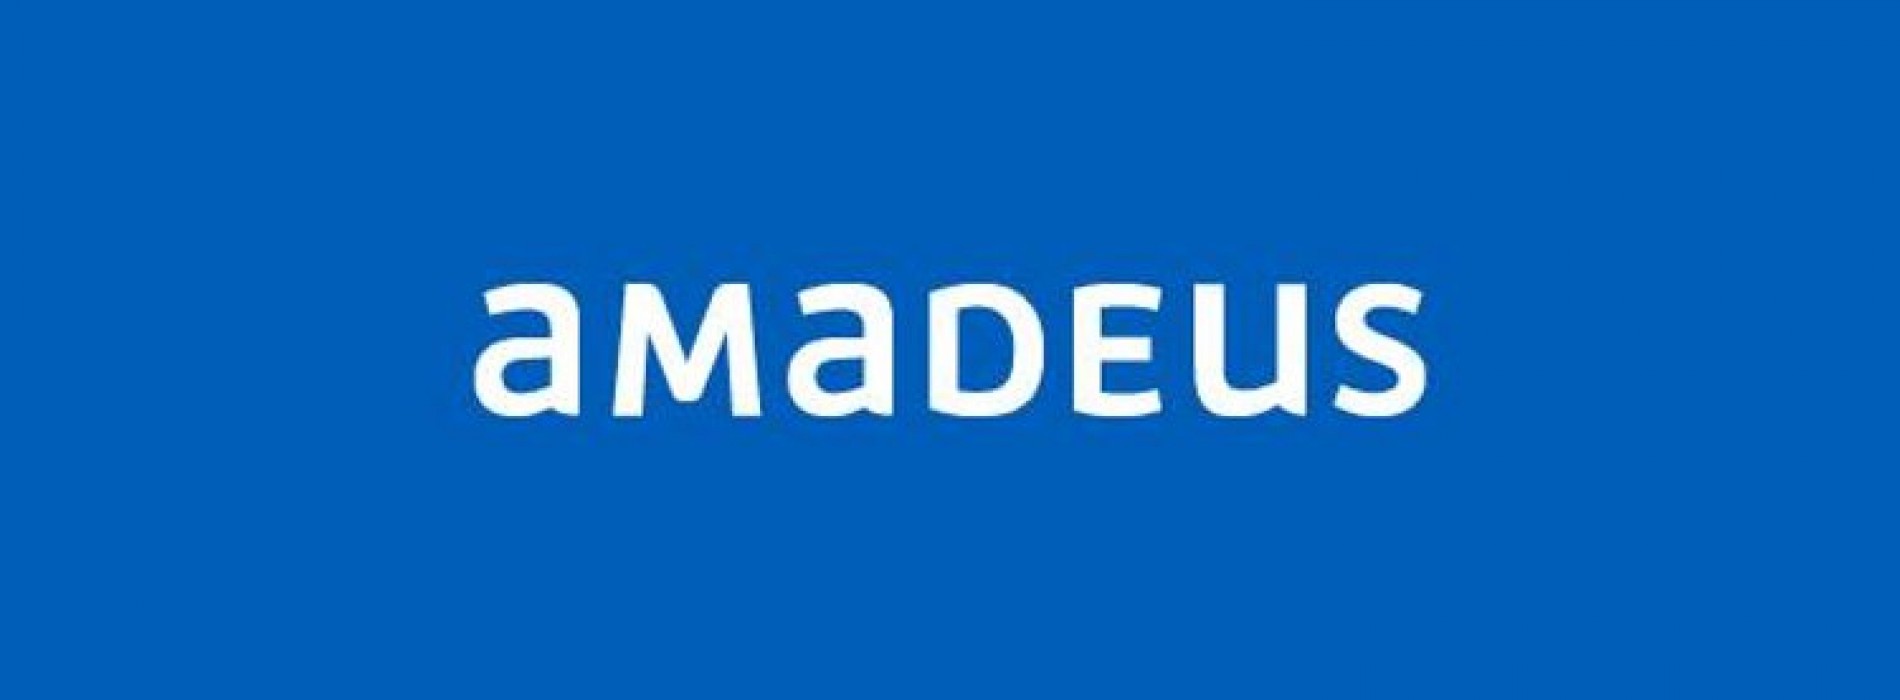 Amadeus completes acquisition of Navitaire